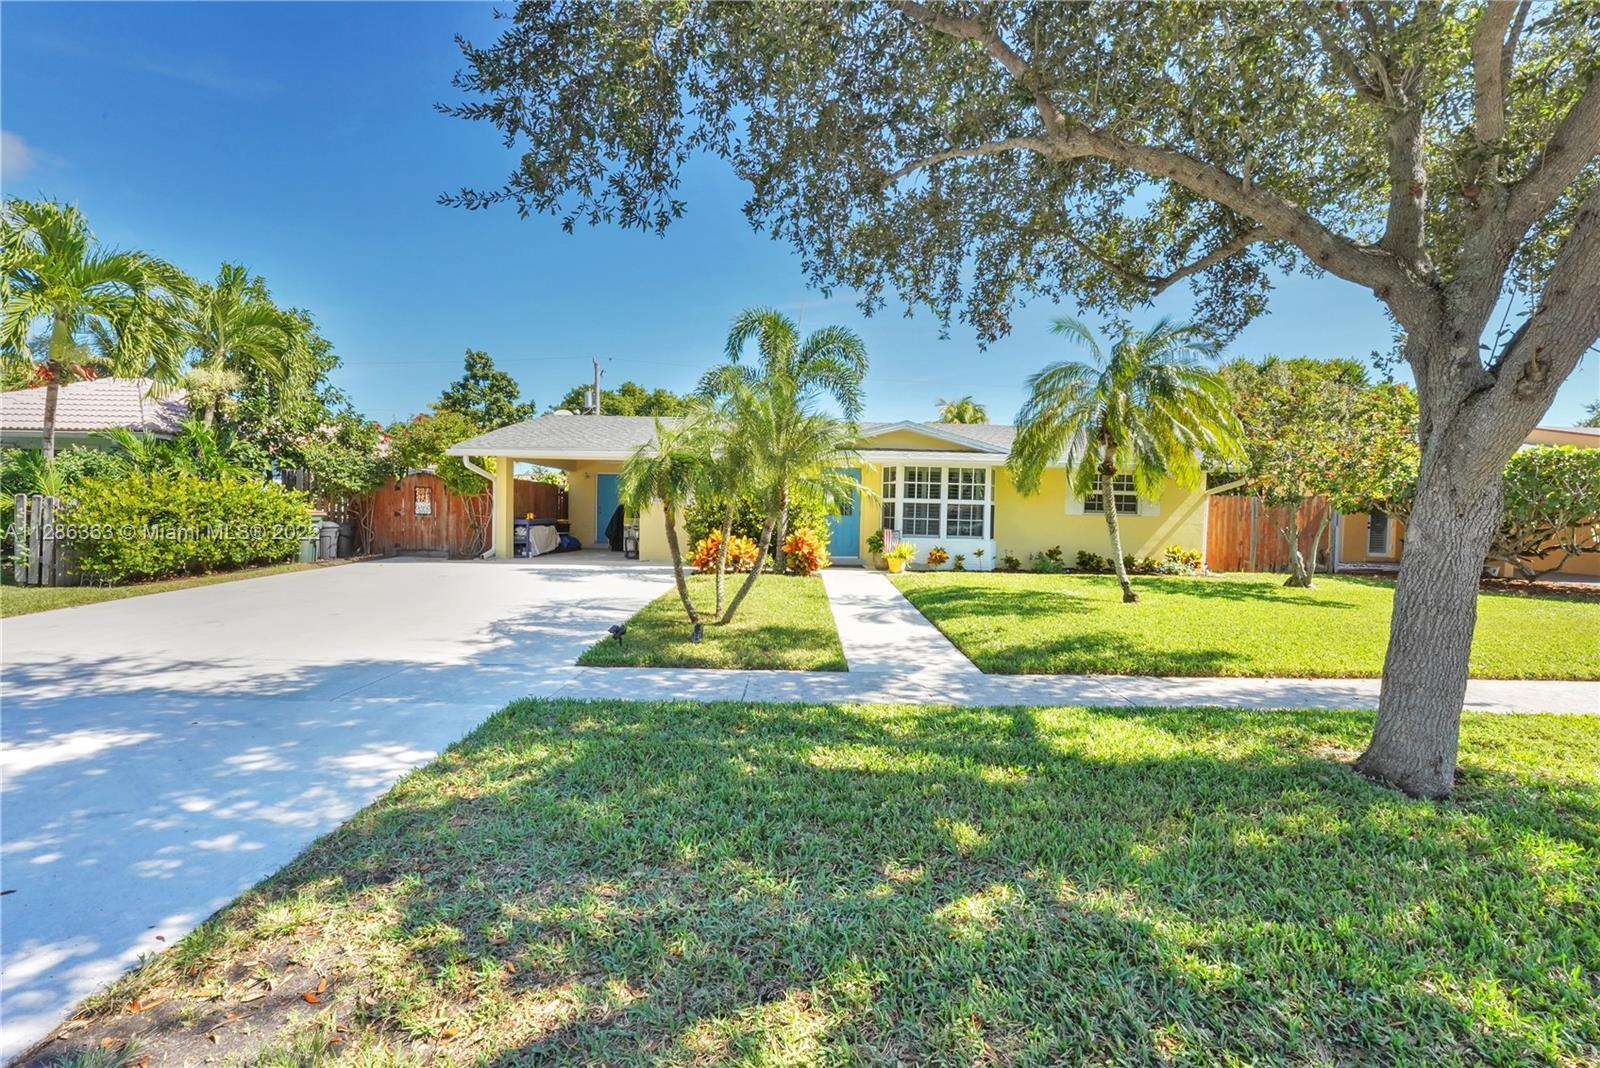 Stunning 3 bedroom, 2 bathroom home located in desirable Lighthouse Point featuring a split floor pl